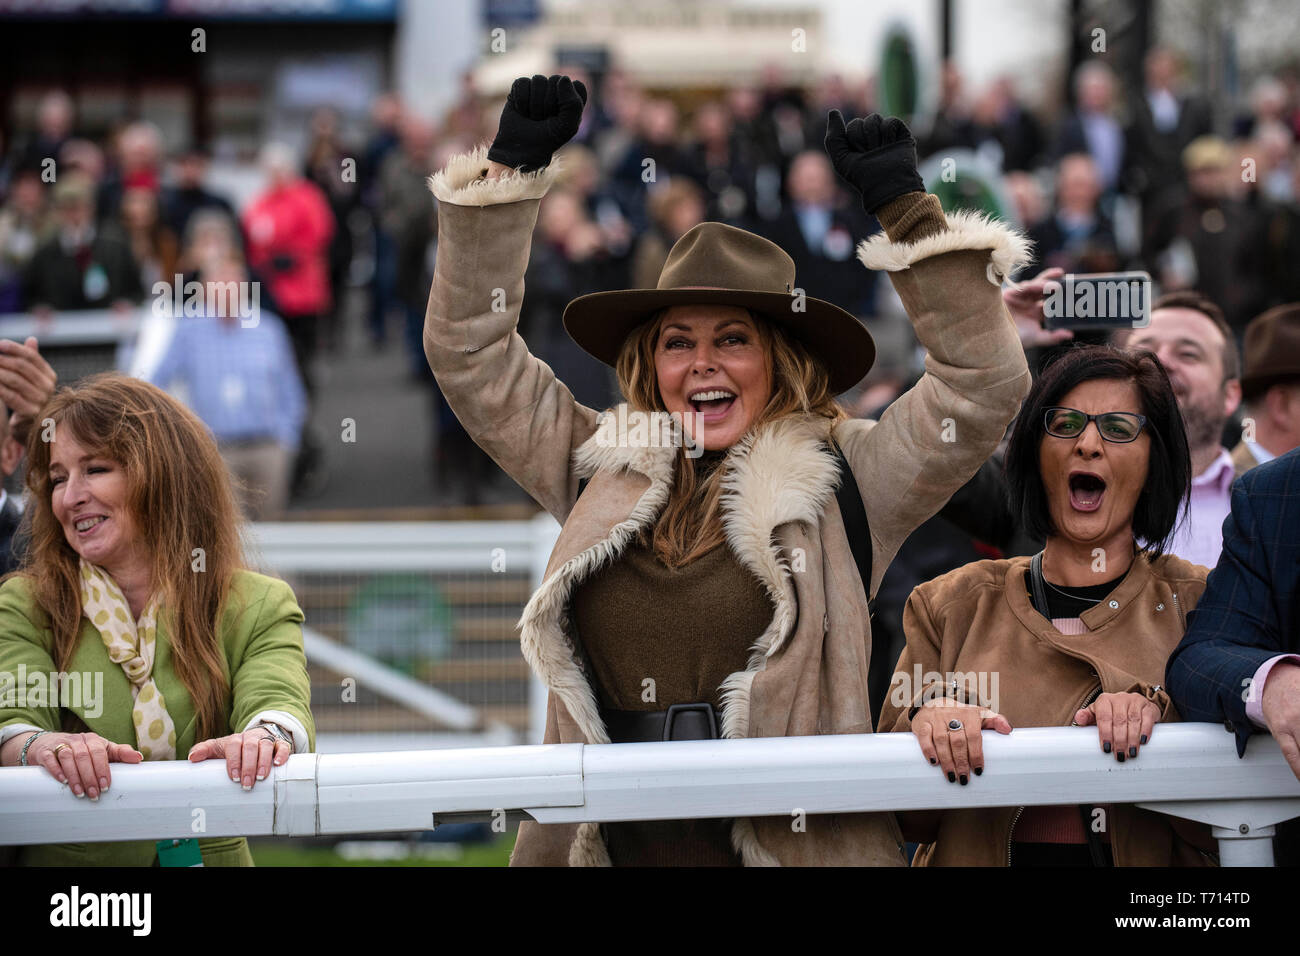 Carol Vorderman (centre) at Chepstow Racecourse to watch her horse 'Subway Surf' racing. Stock Photo